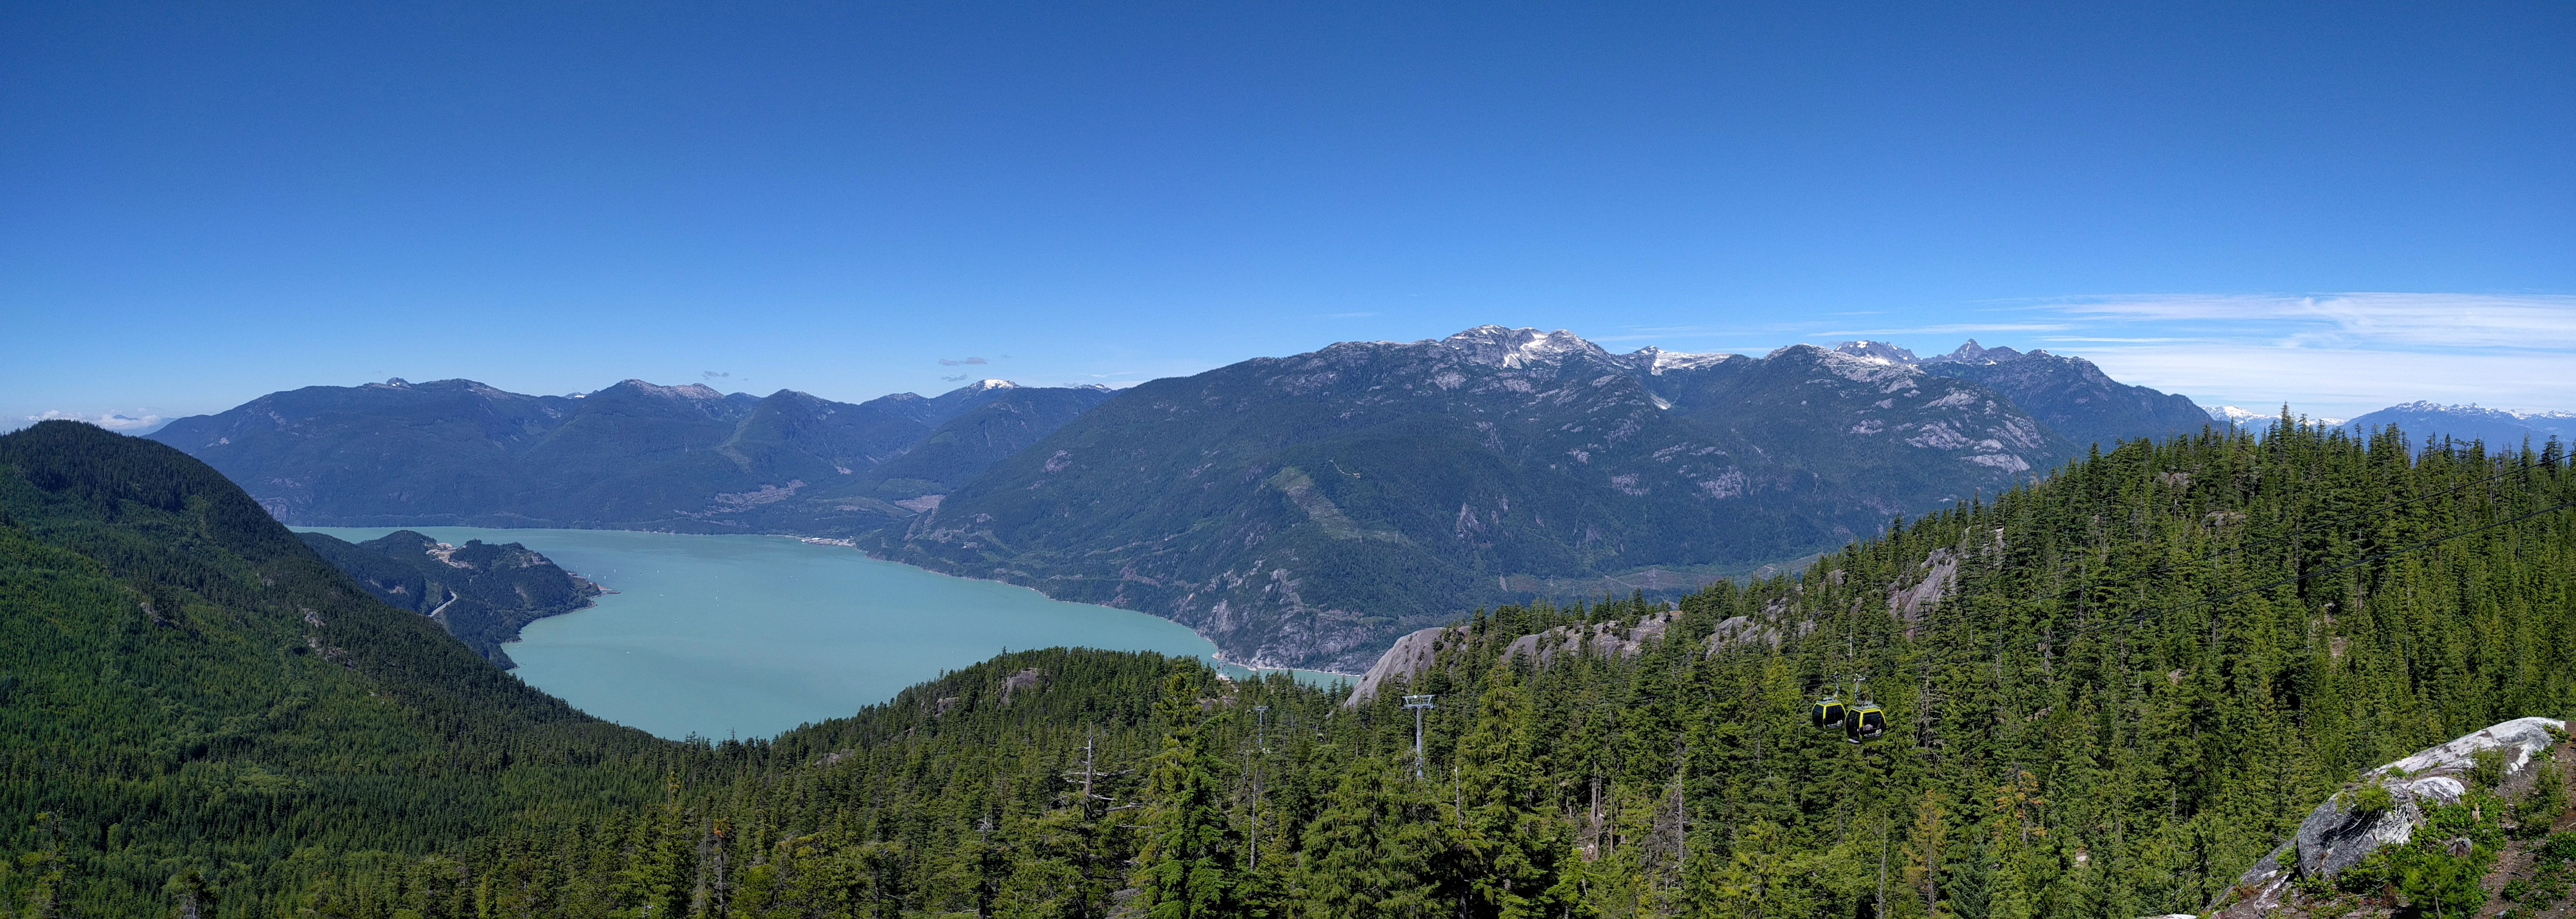 View at the top of the Sea to Sky Gondola